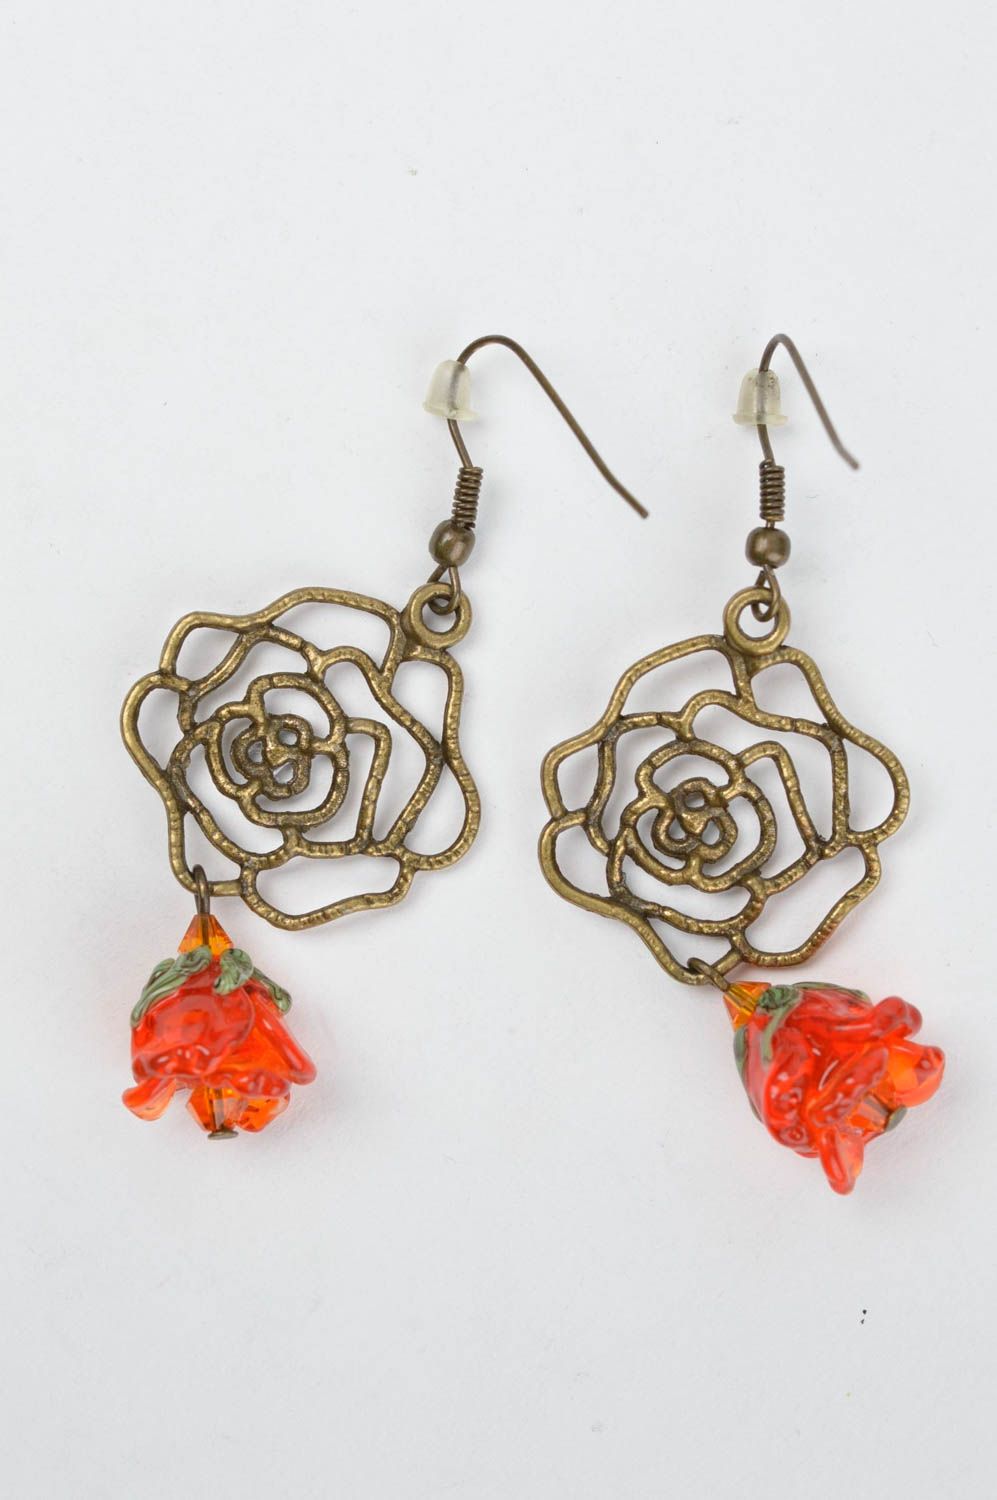 Handmade flower earrings stylish glass earrings accessories with charms photo 2